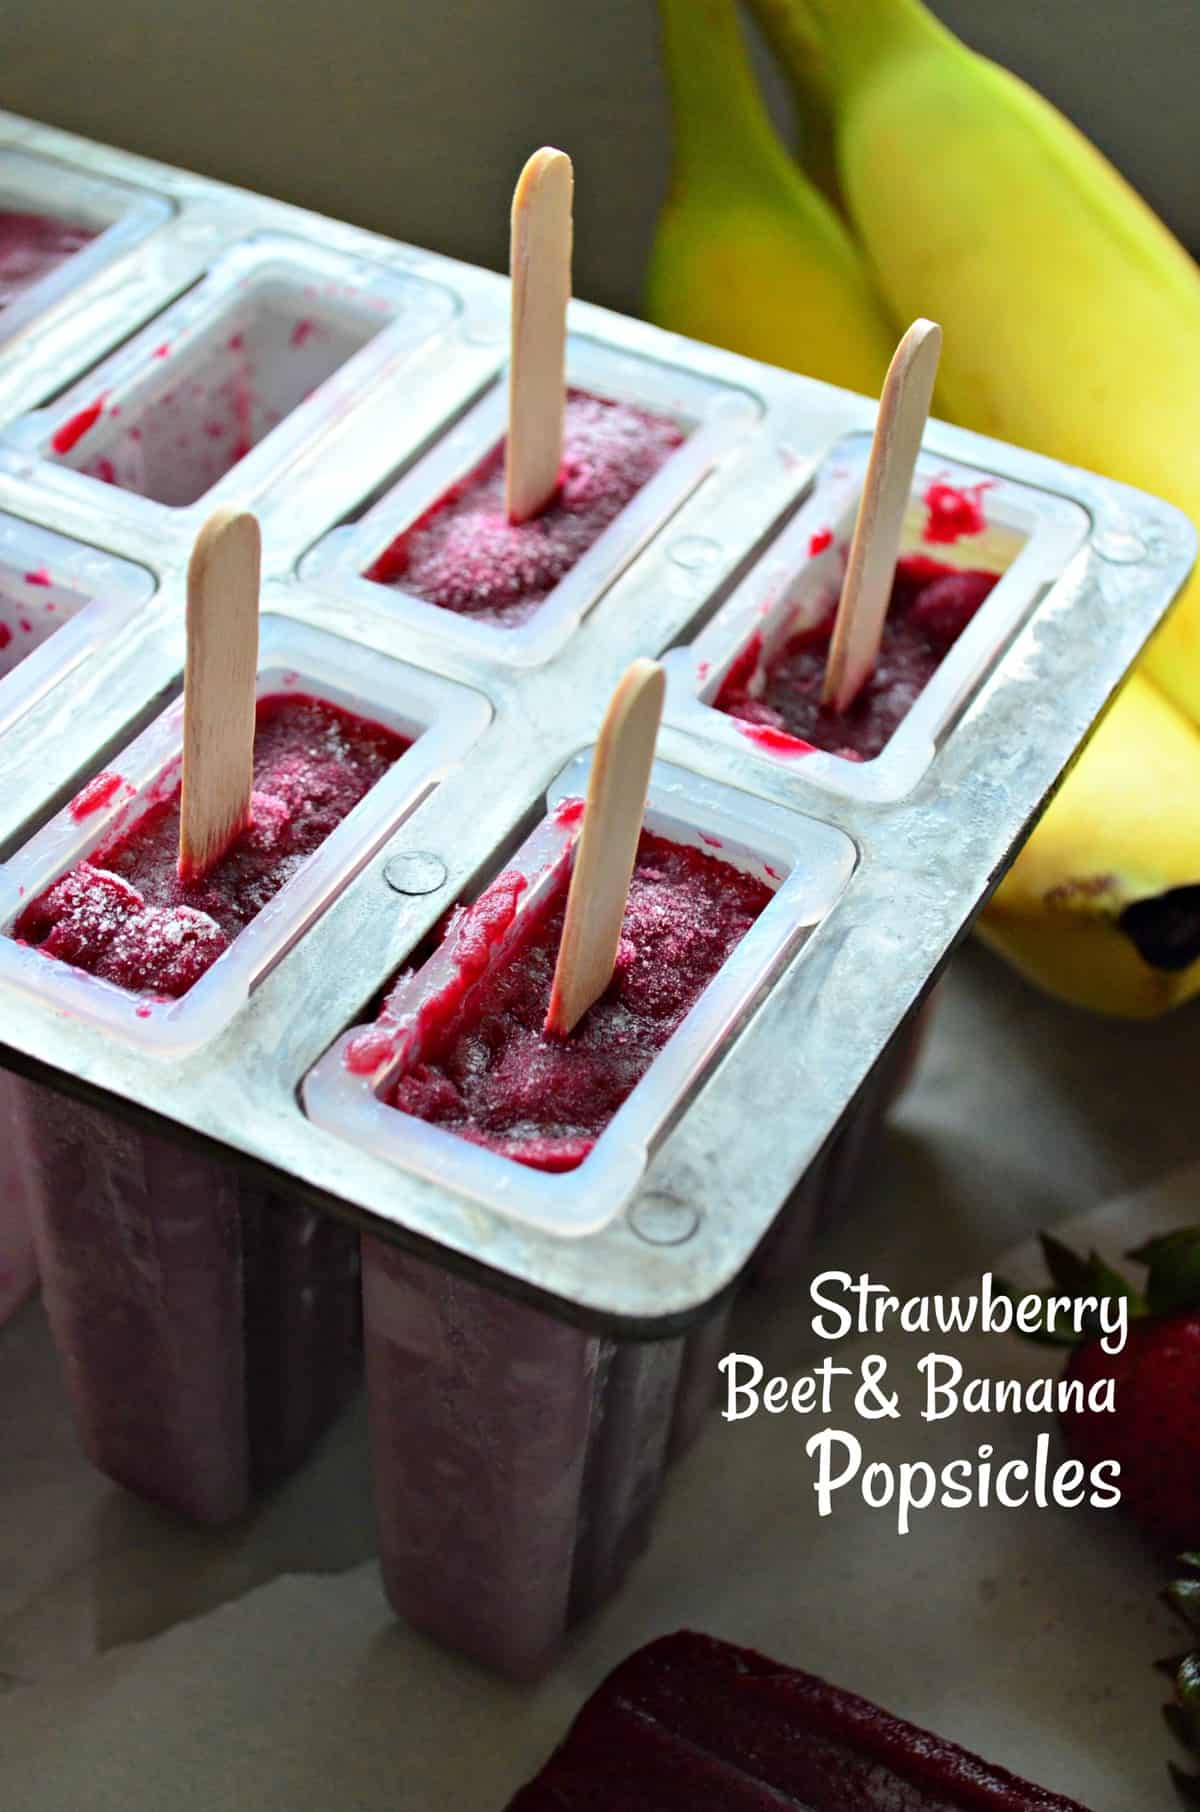 Beet red popsicles in popsicle tray with wooden sticks sticking out next to fresh bananas with title text.